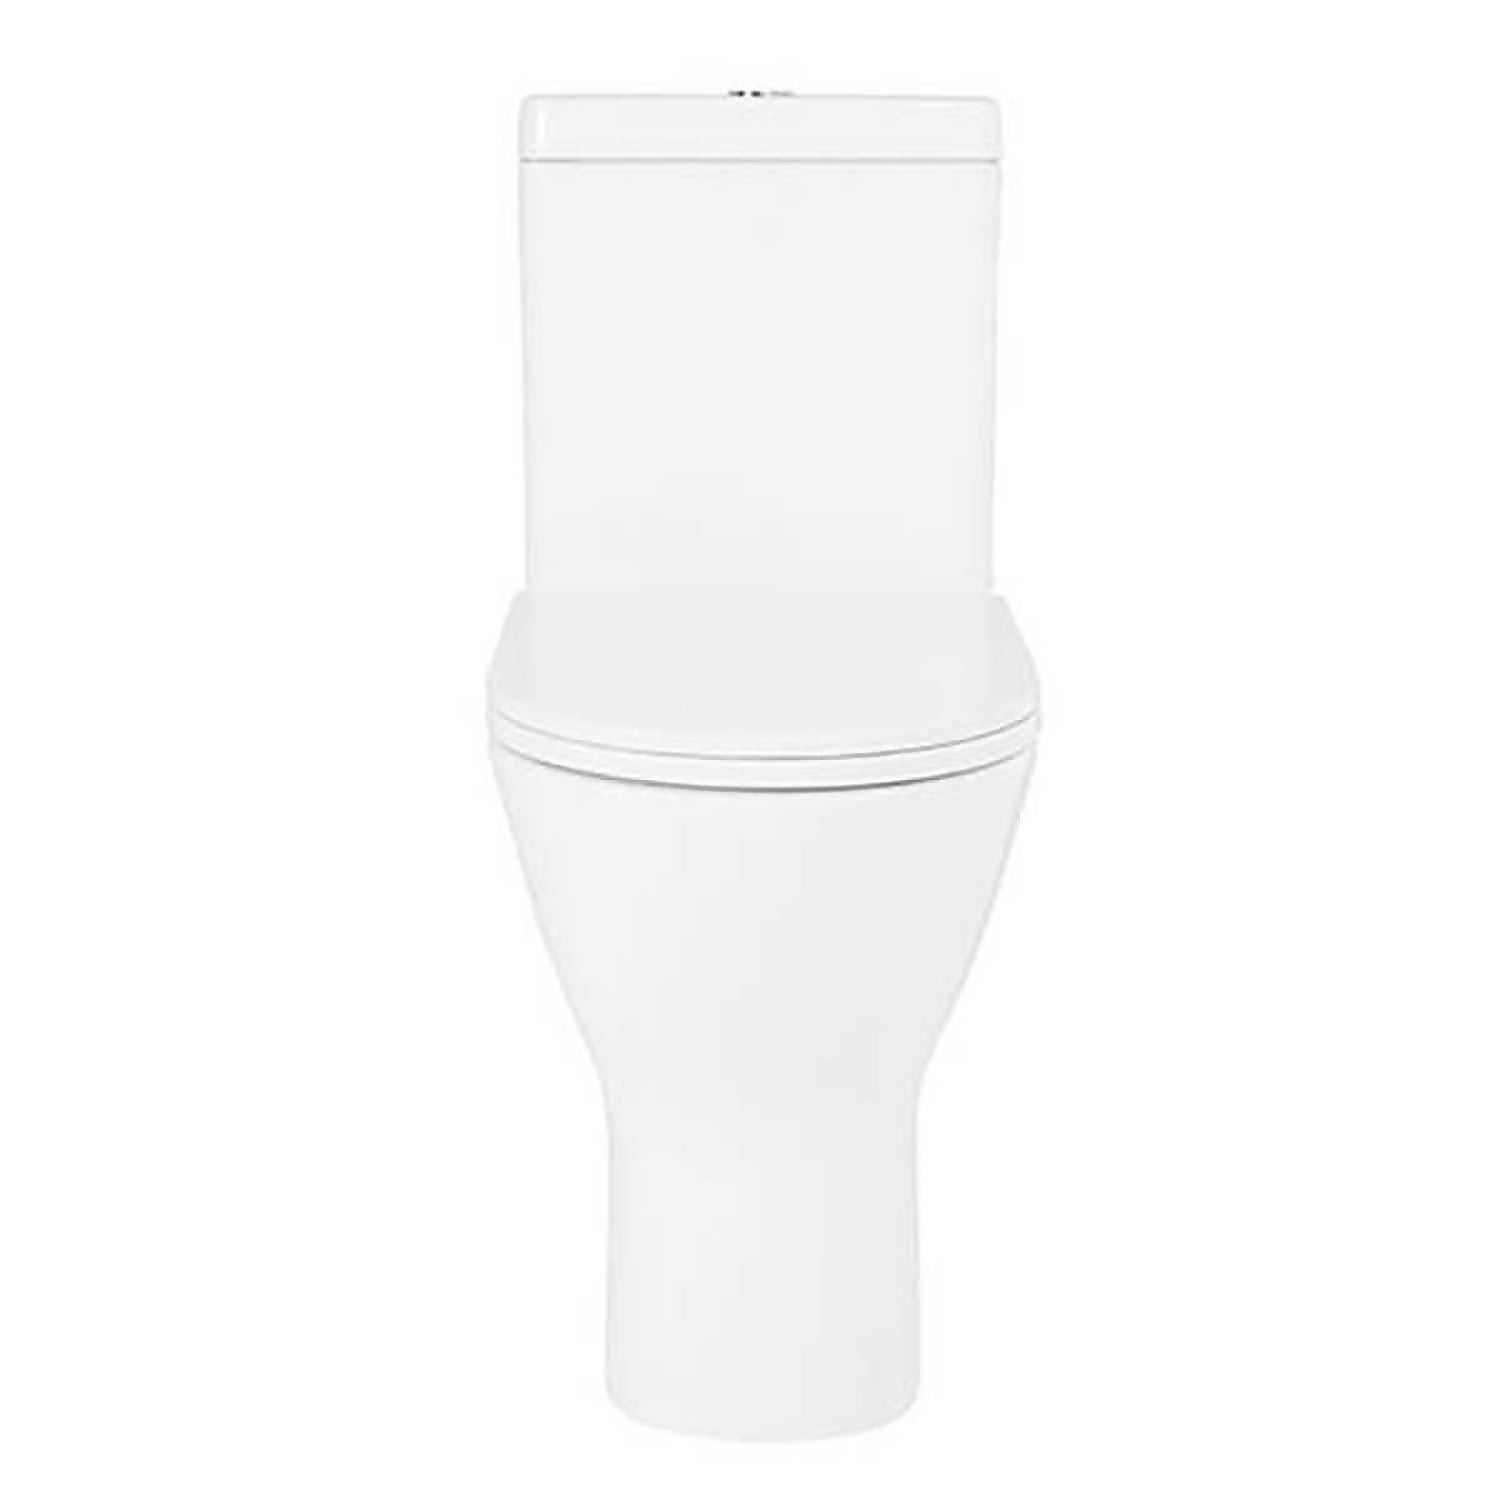 Falcon Comfort Rimless Open Back Close Coupled Toilet with Soft Close Toilet Seat